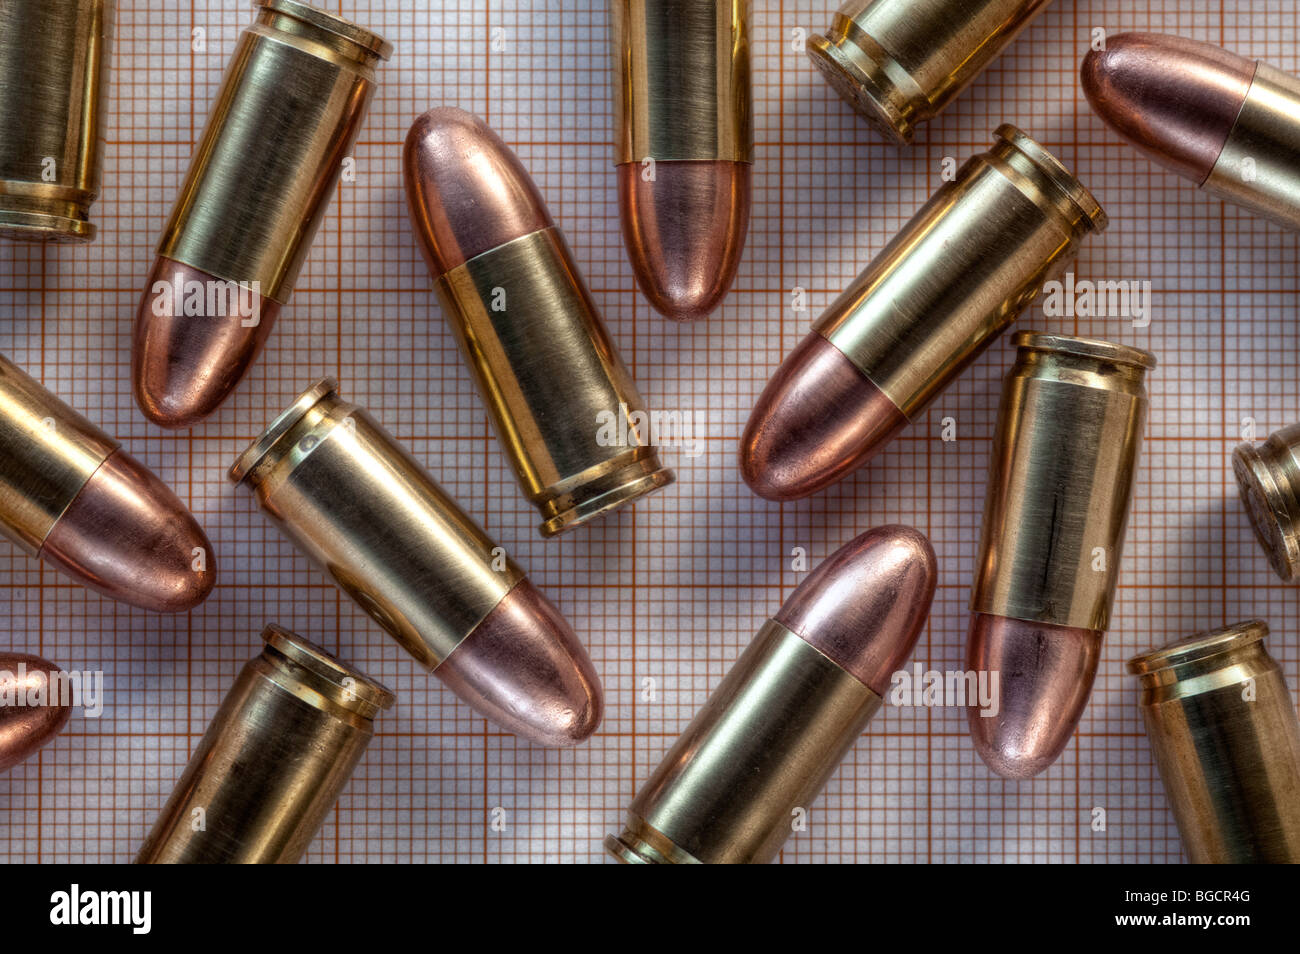 9mm cartridges on 1mm square graph paper Stock Photo